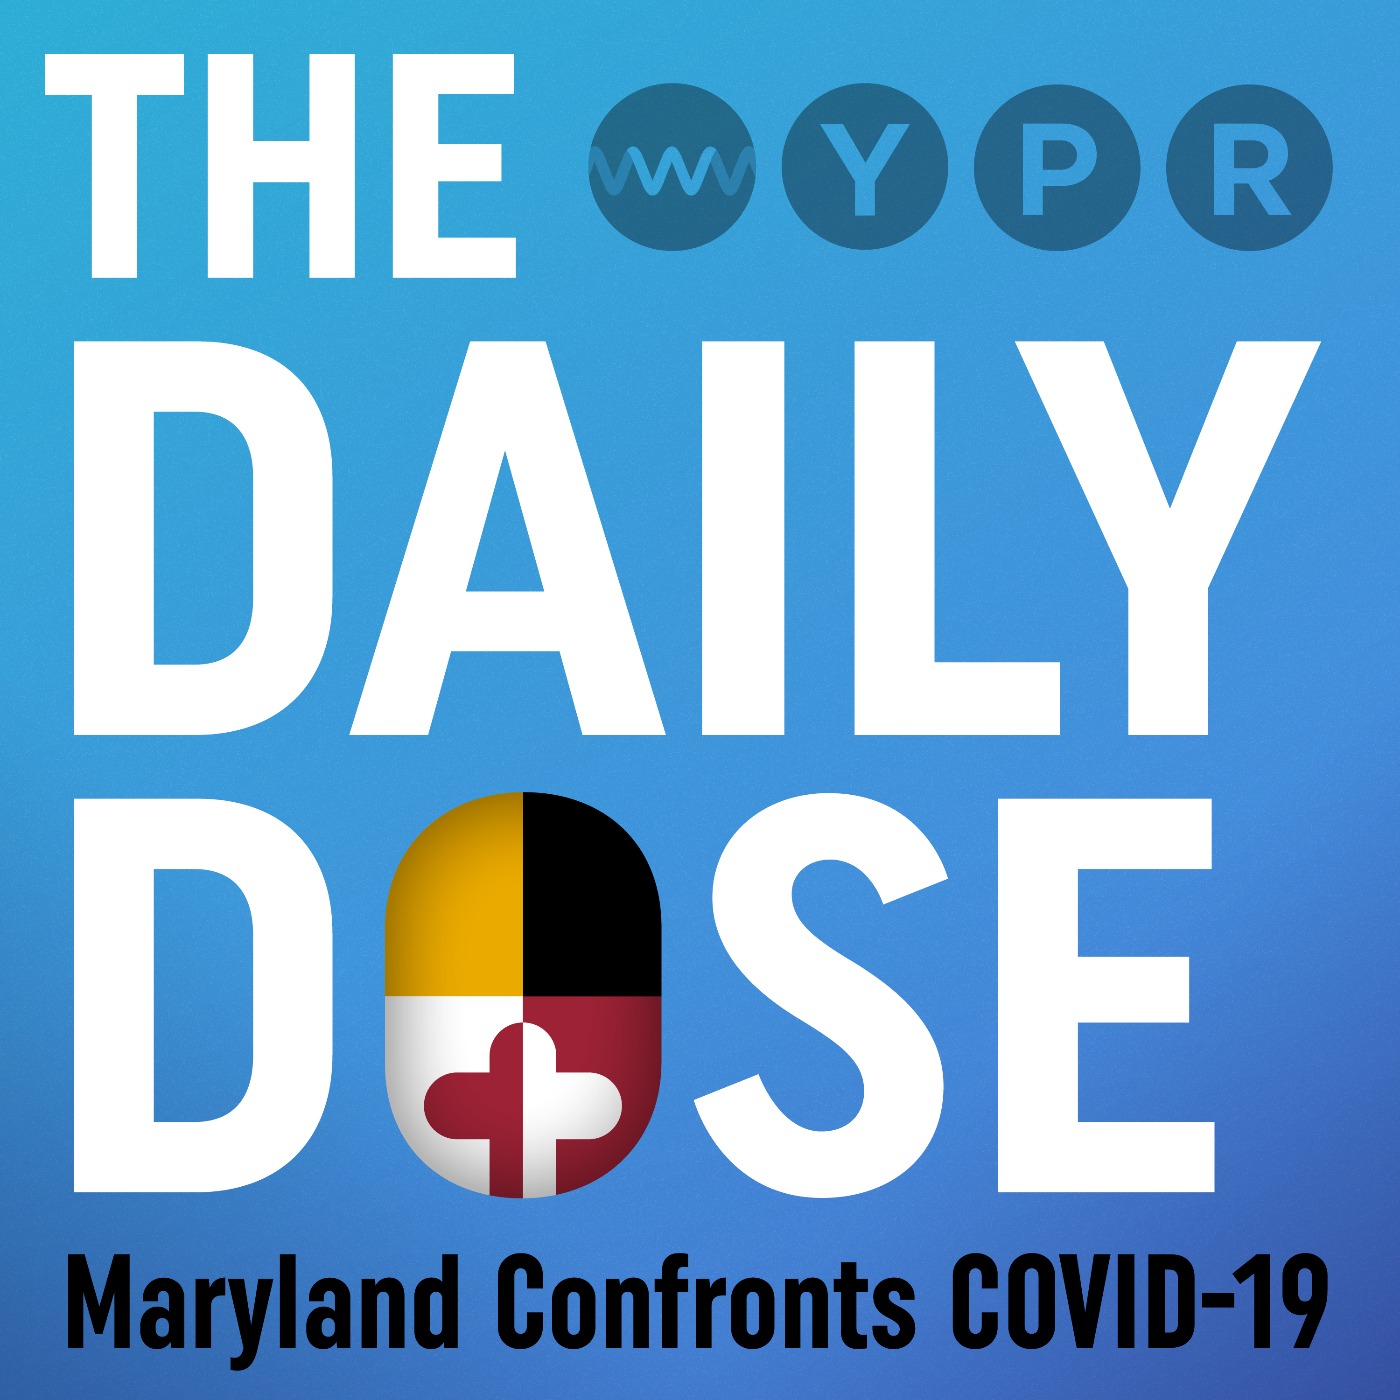 Maryland grapples with second holiday COVID surge